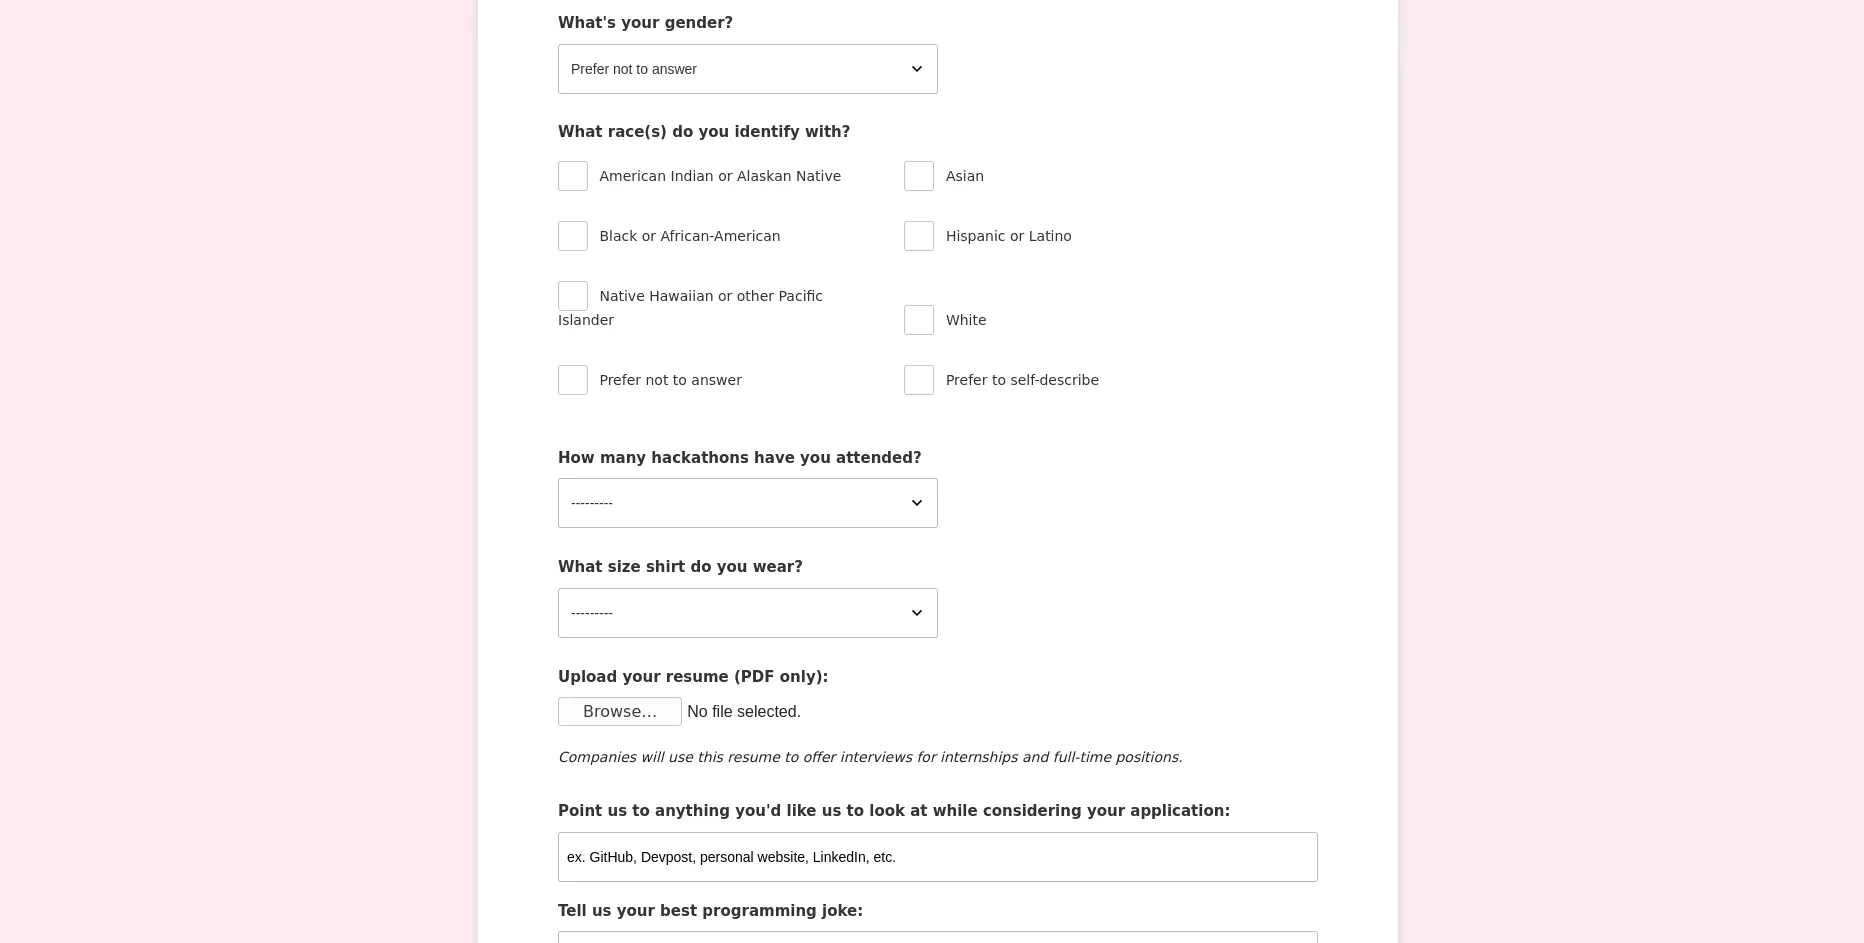 A screenshot of the TAMUhack 2020 application form. Questions on the form include gender, prior hackathon experience, shirt size, and a request for a resume.